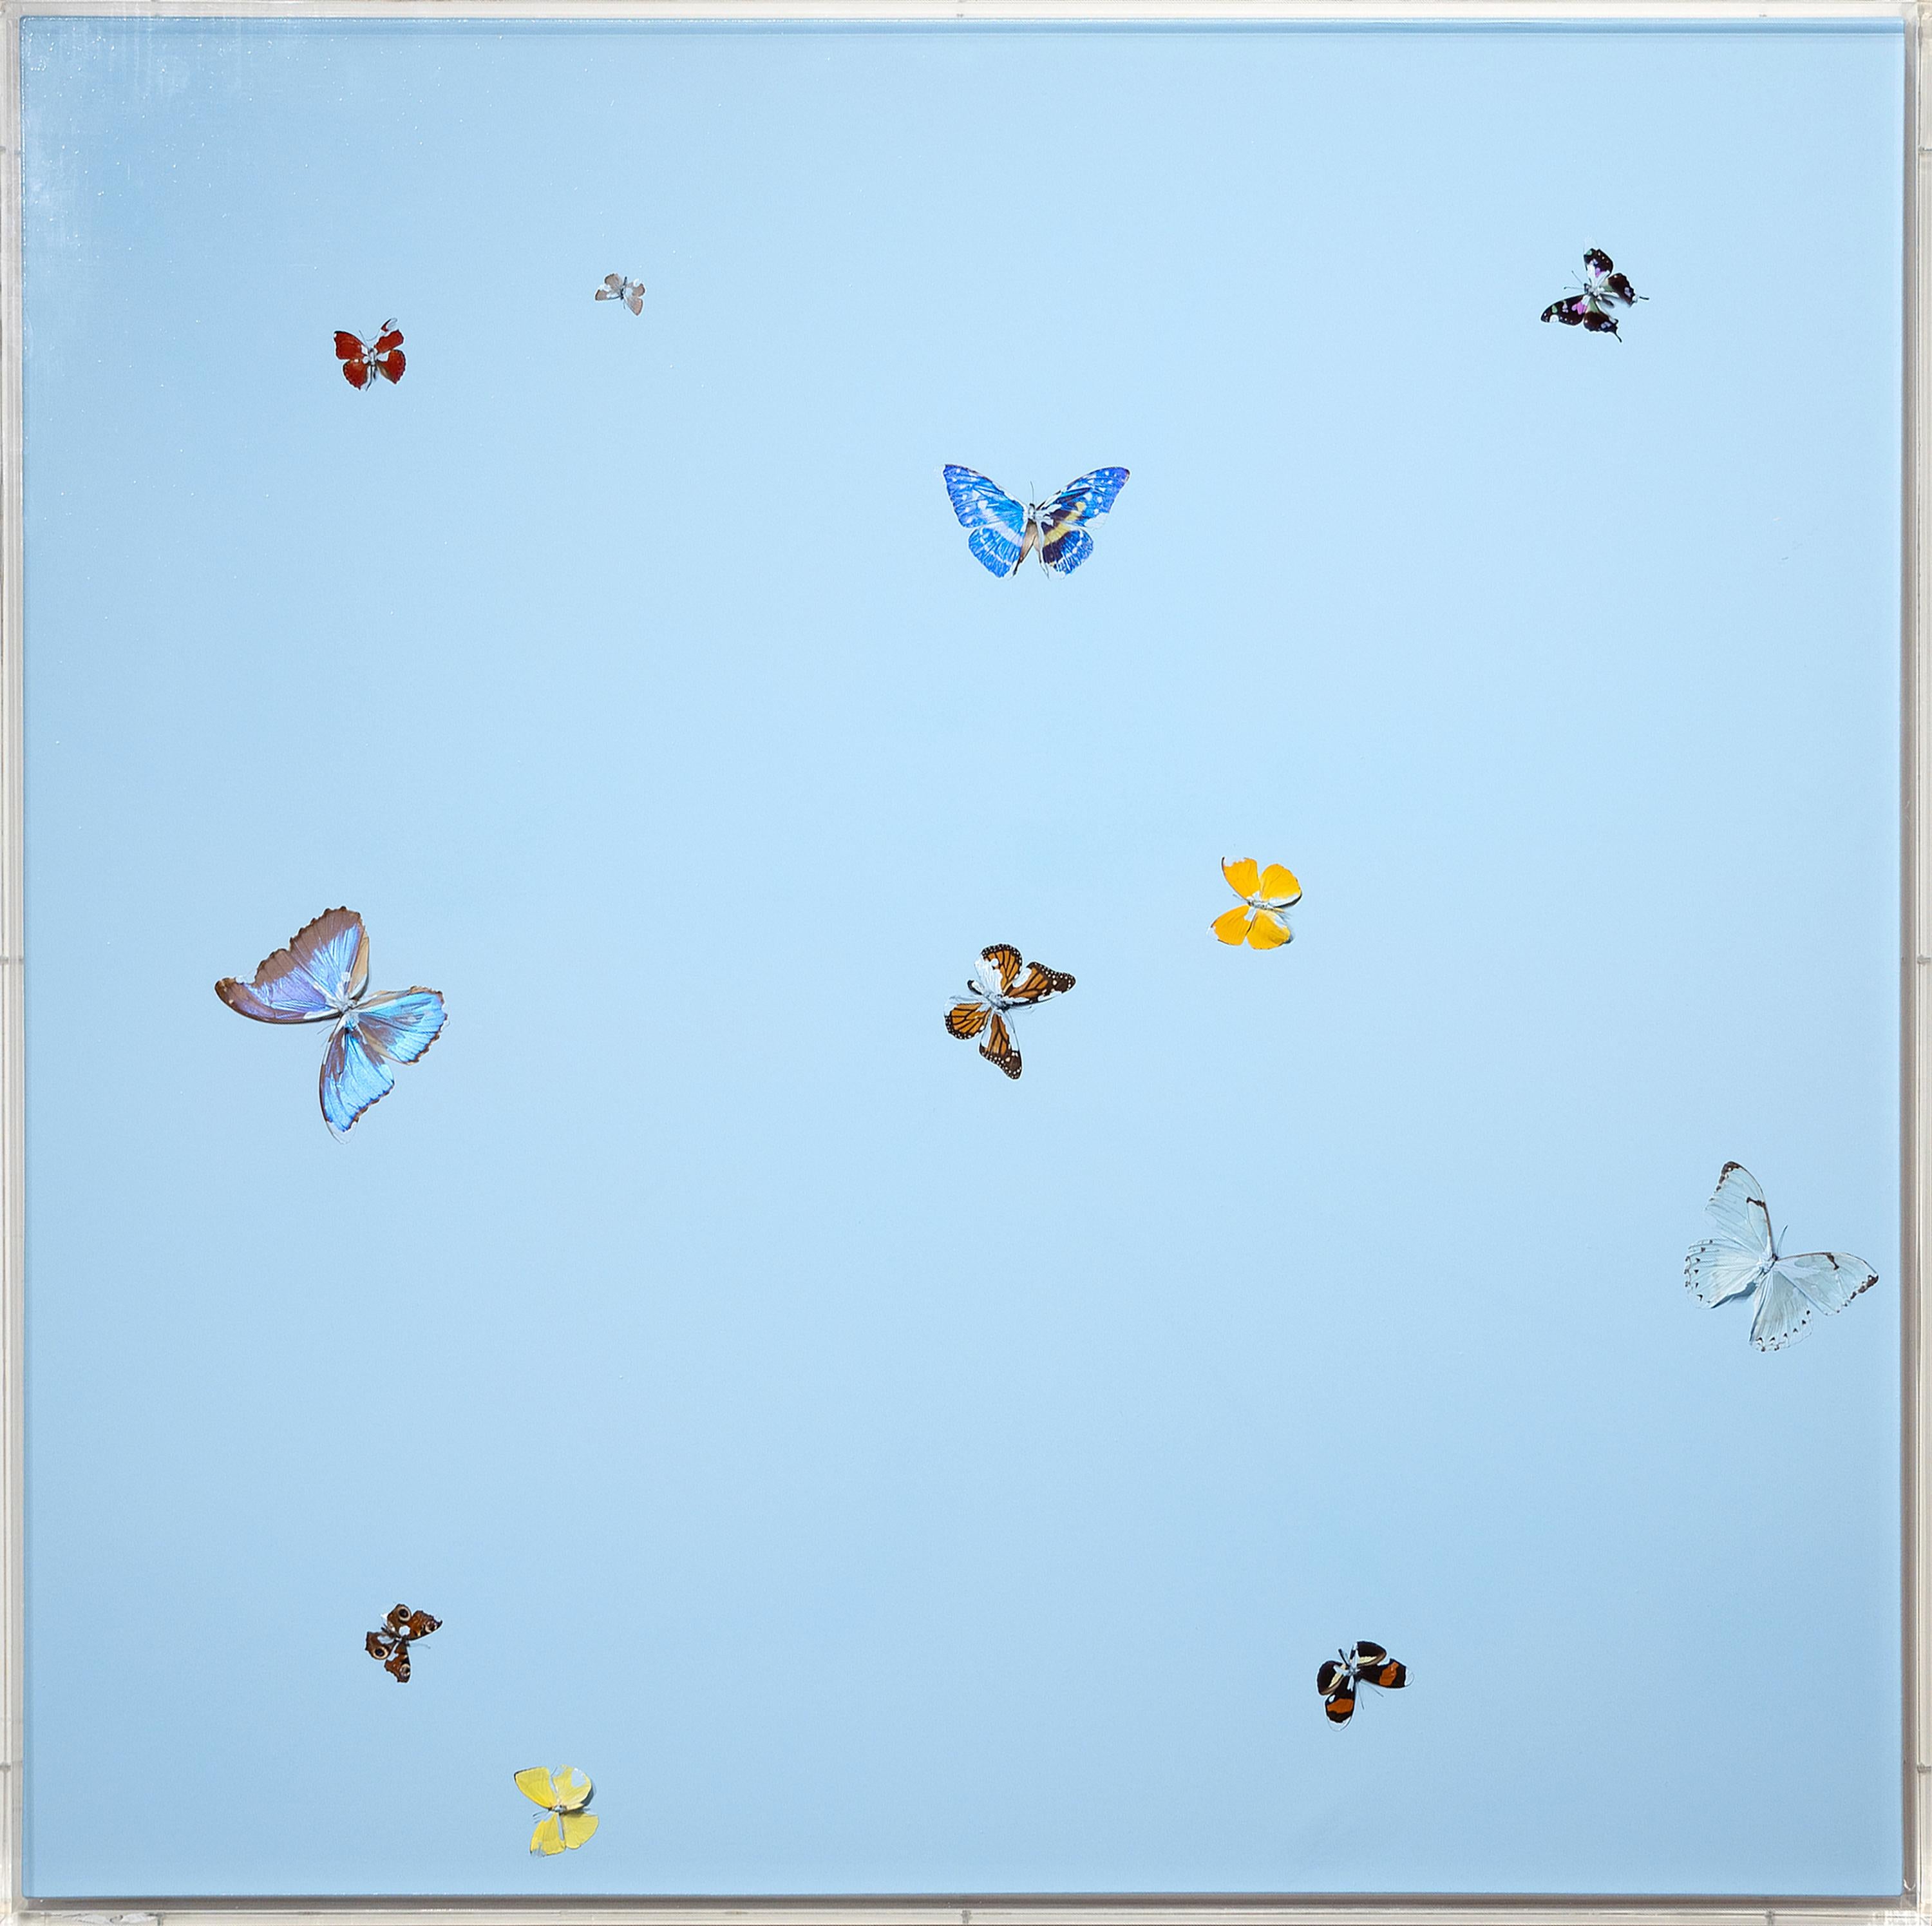 Forgotten Thoughts - Painting by Damien Hirst